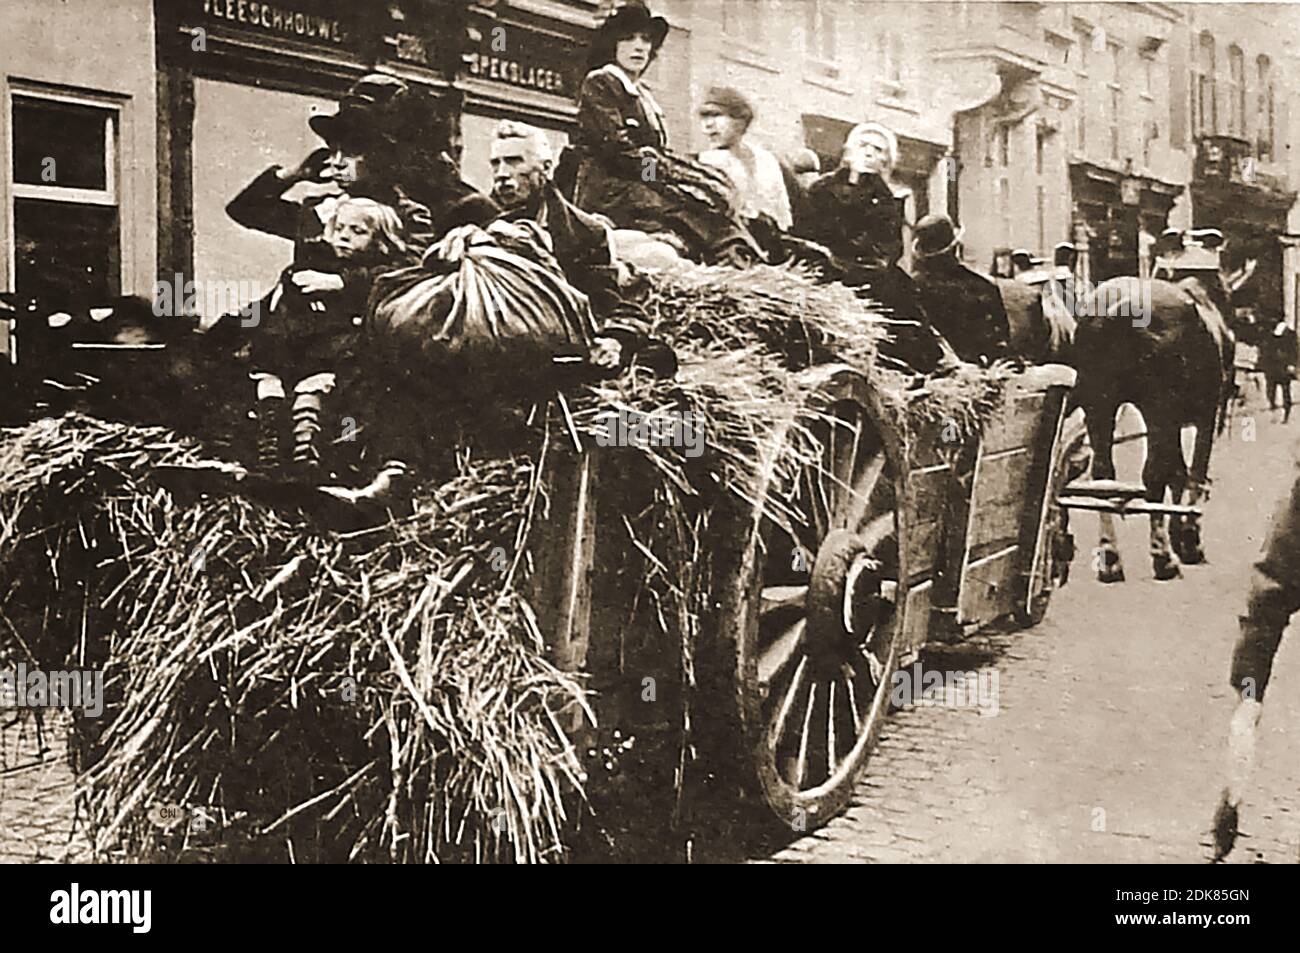 WWI  1914 -  Belgian refugees fleeing from the advancing Nazi's using  an old hay cart and carrying  their  most prcious possessions wrapped in tied up cloth bags. Germany invaded Belgium on the 4th August 1914, following the Belgian authorities denying them  free passage through Belgium on their way to Paris.  Thousands of Belgian subjects fled to Britain and many of their citizens joined the British army. 25,000 wounded Belgian soldiers convalesced in Britain after fighting on the front. Stock Photo